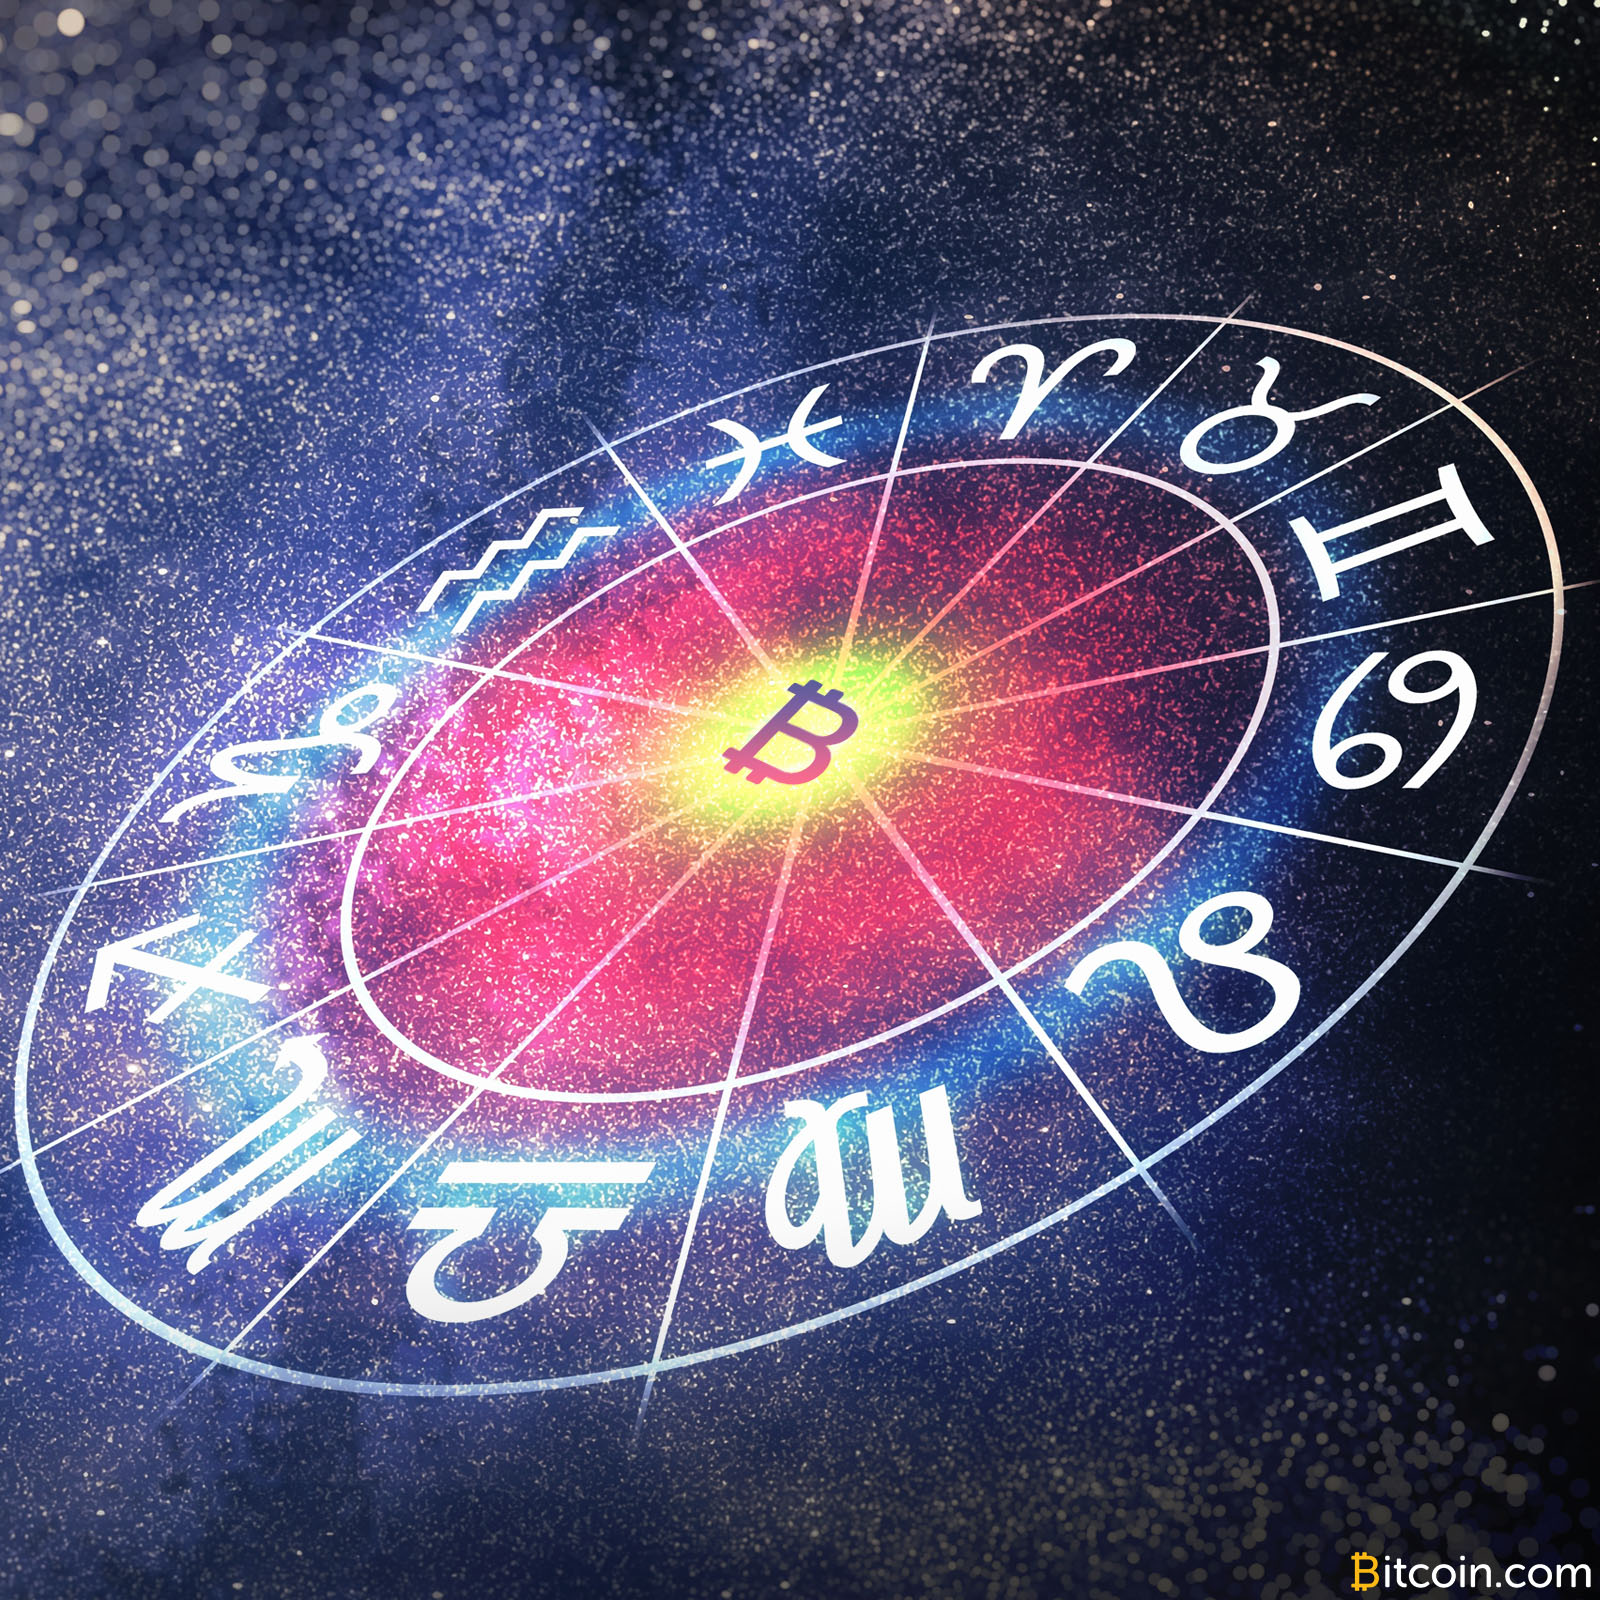 Quantum Physics and Astrology Predict Bad Things For Bitcoin